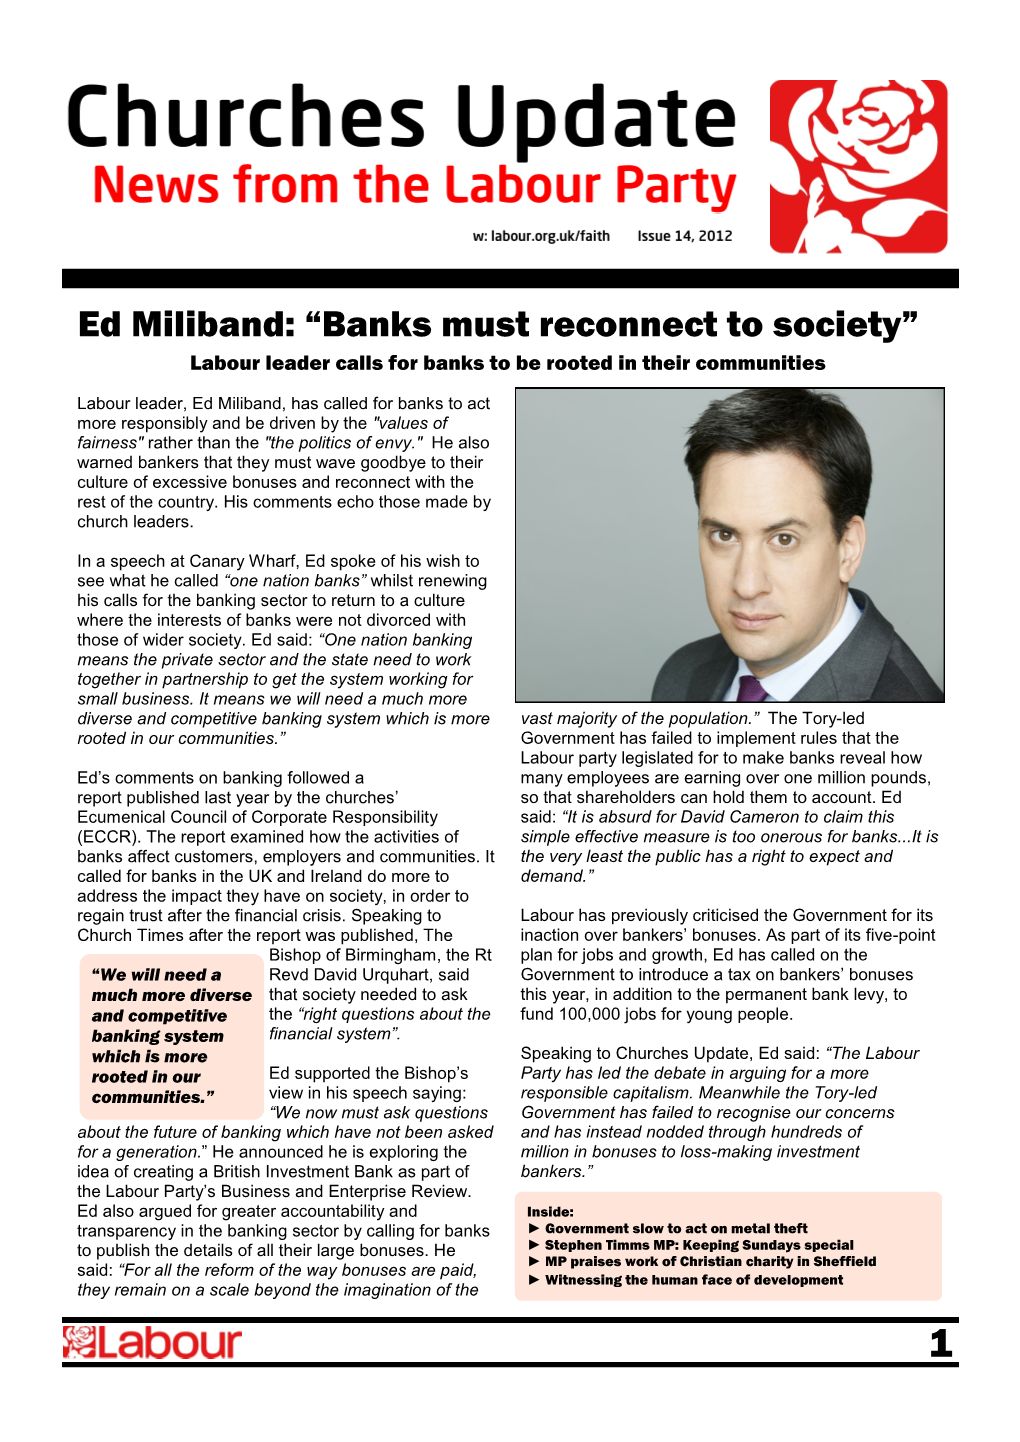 Ed Miliband: “Banks Must Reconnect to Society” Labour Leader Calls for Banks to Be Rooted in Their Communities